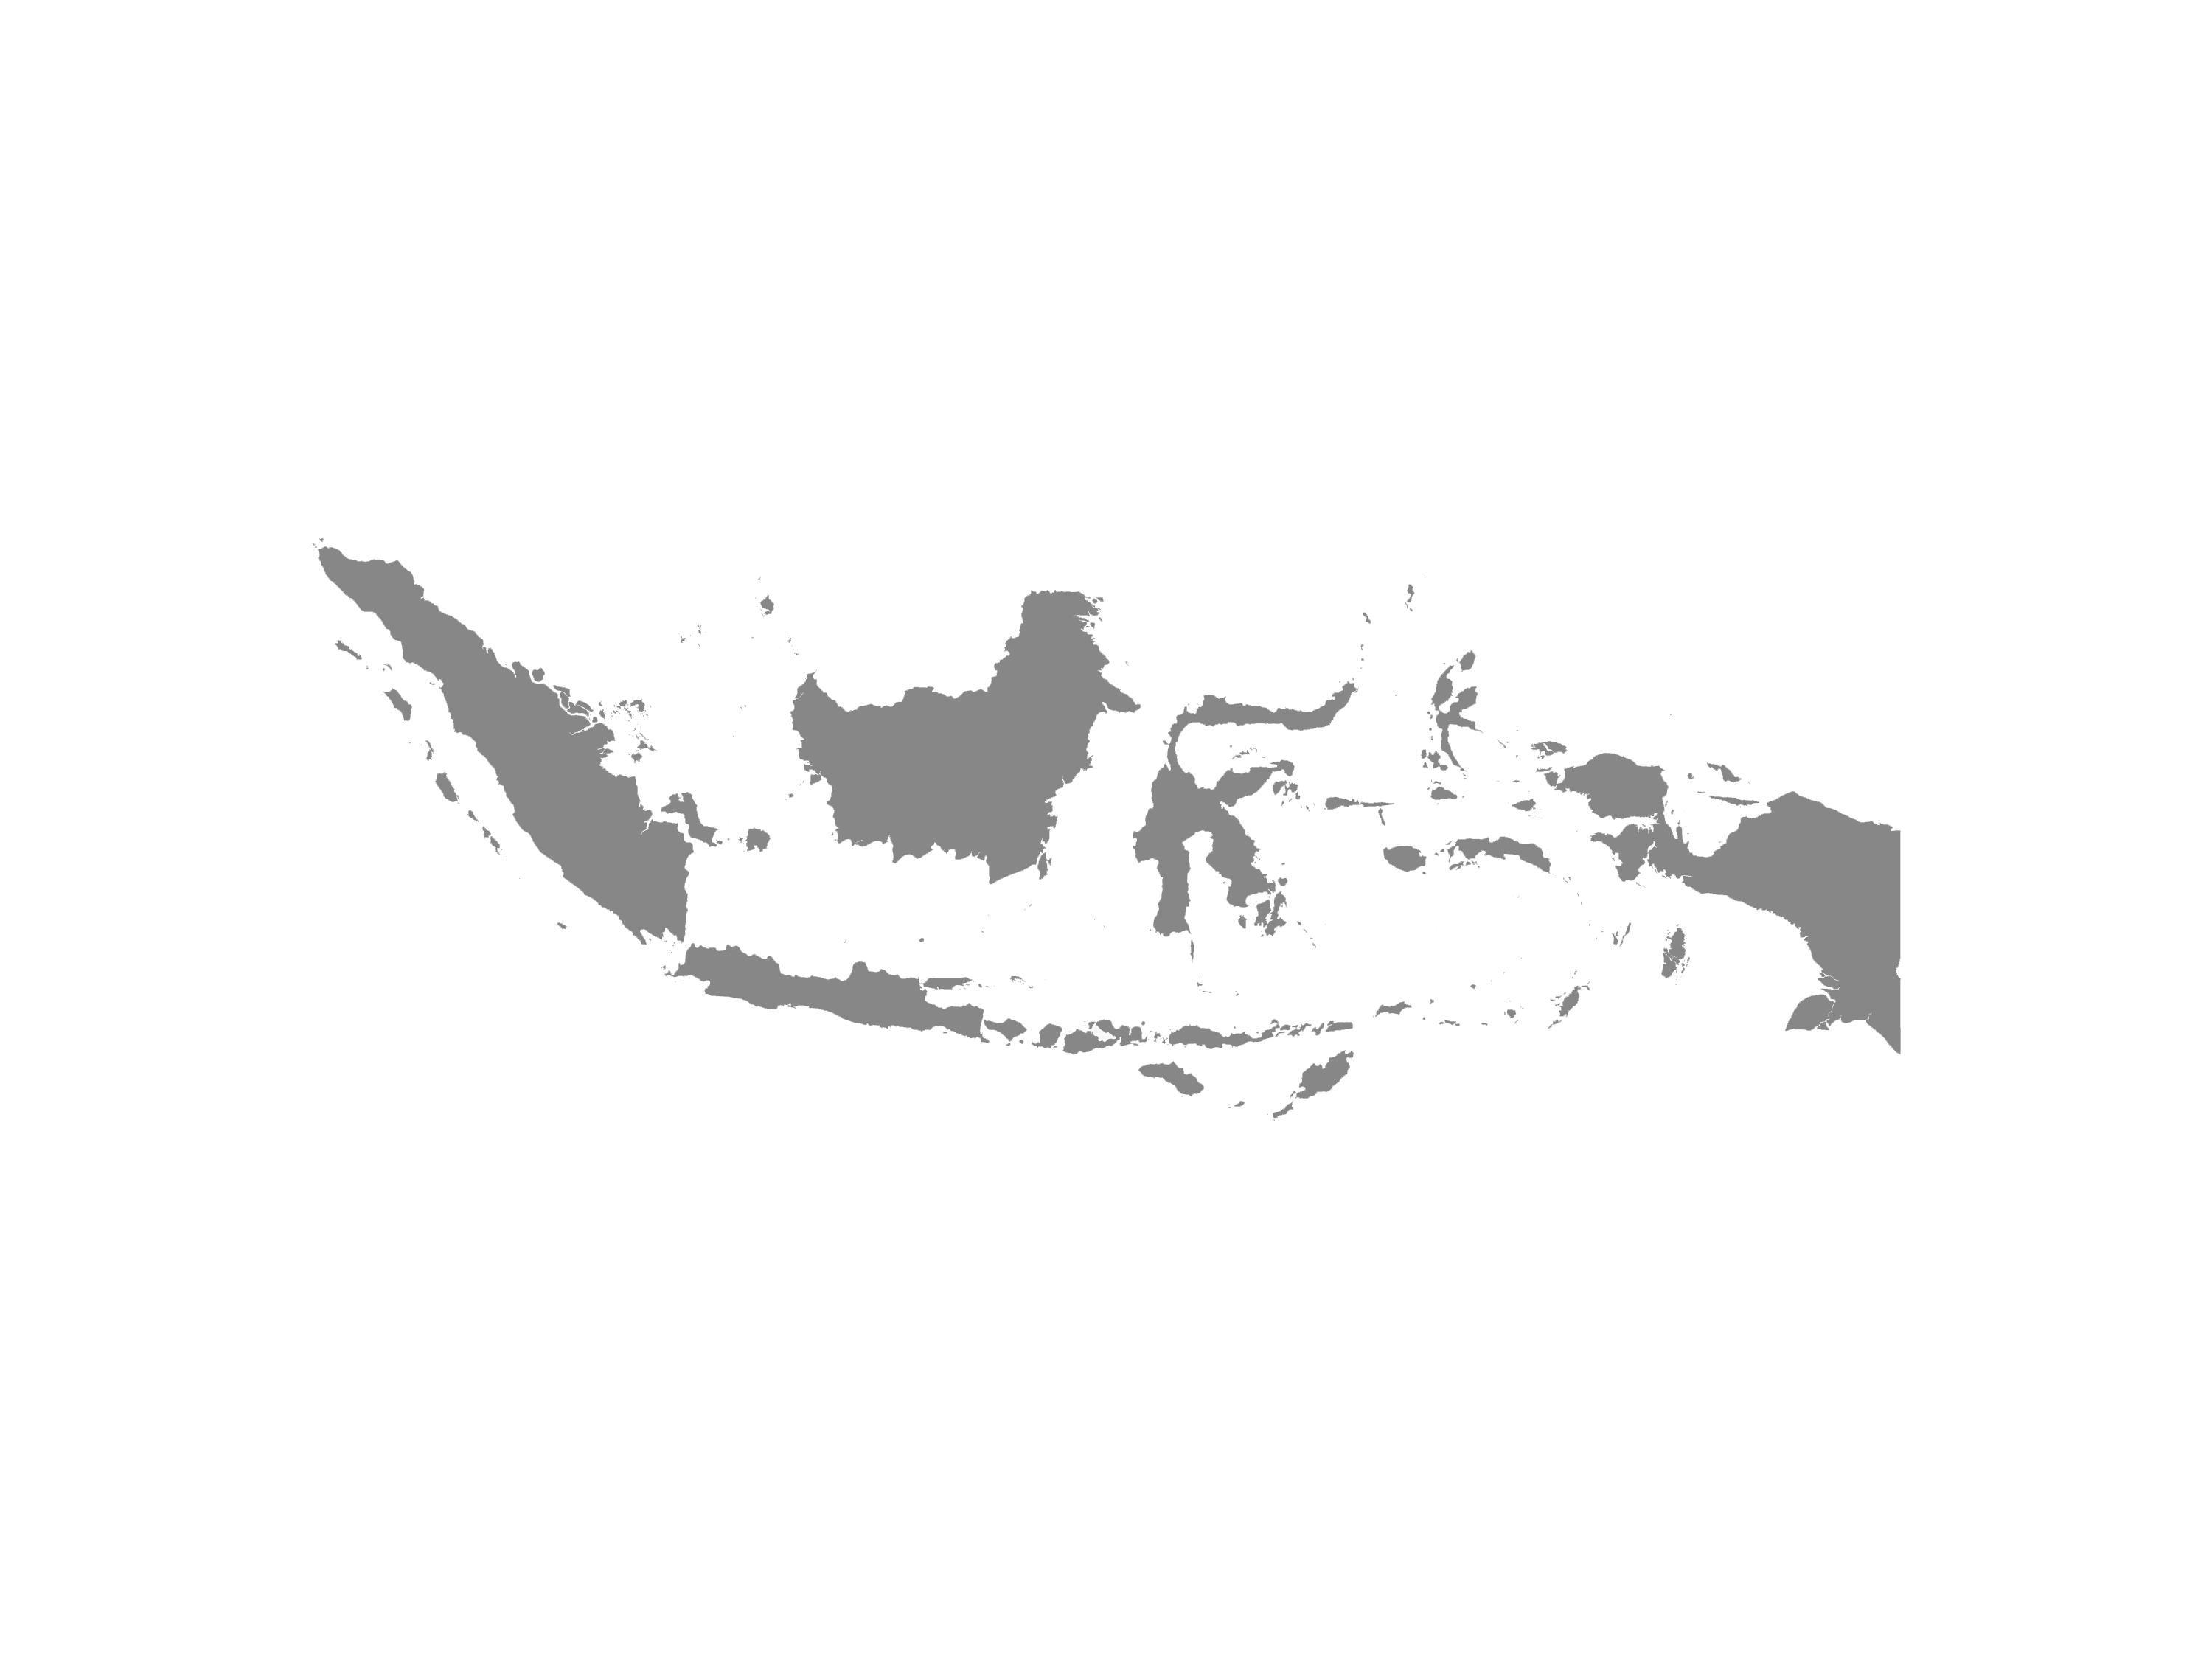 Indonesia - Single Color by FreeVectorMaps.com